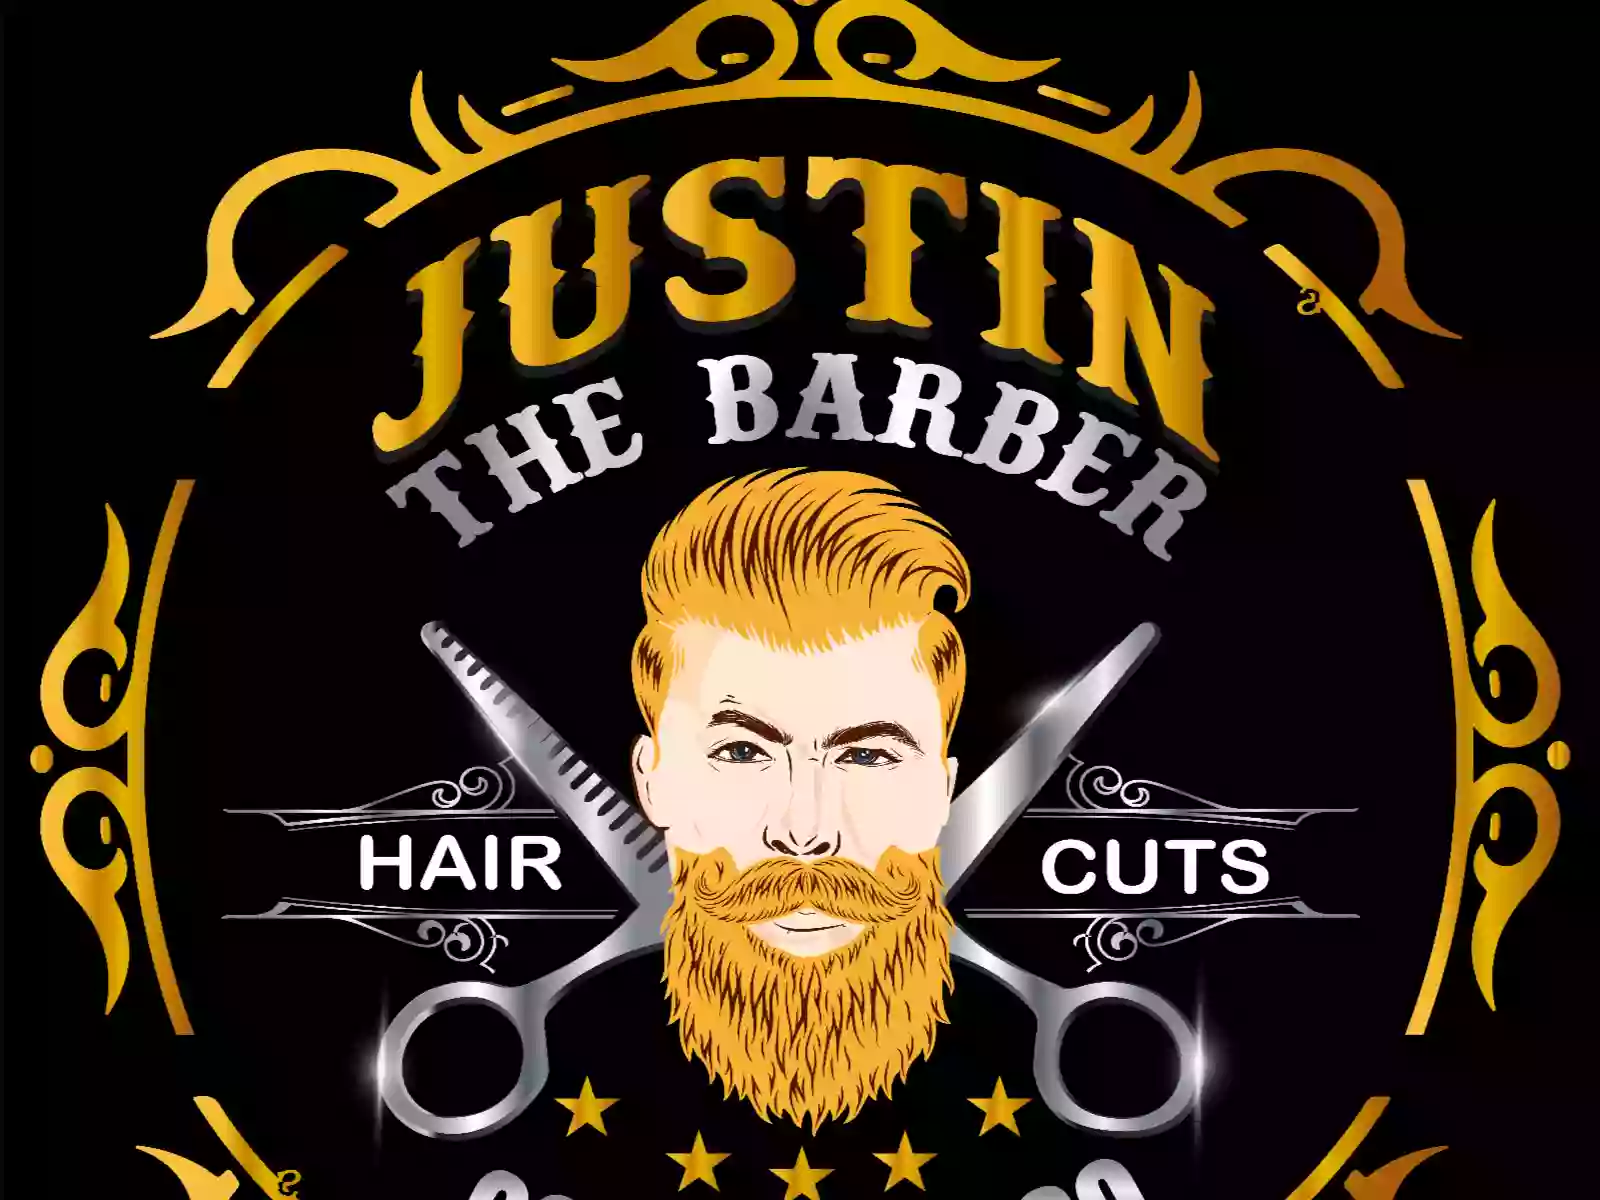 Justin the barber